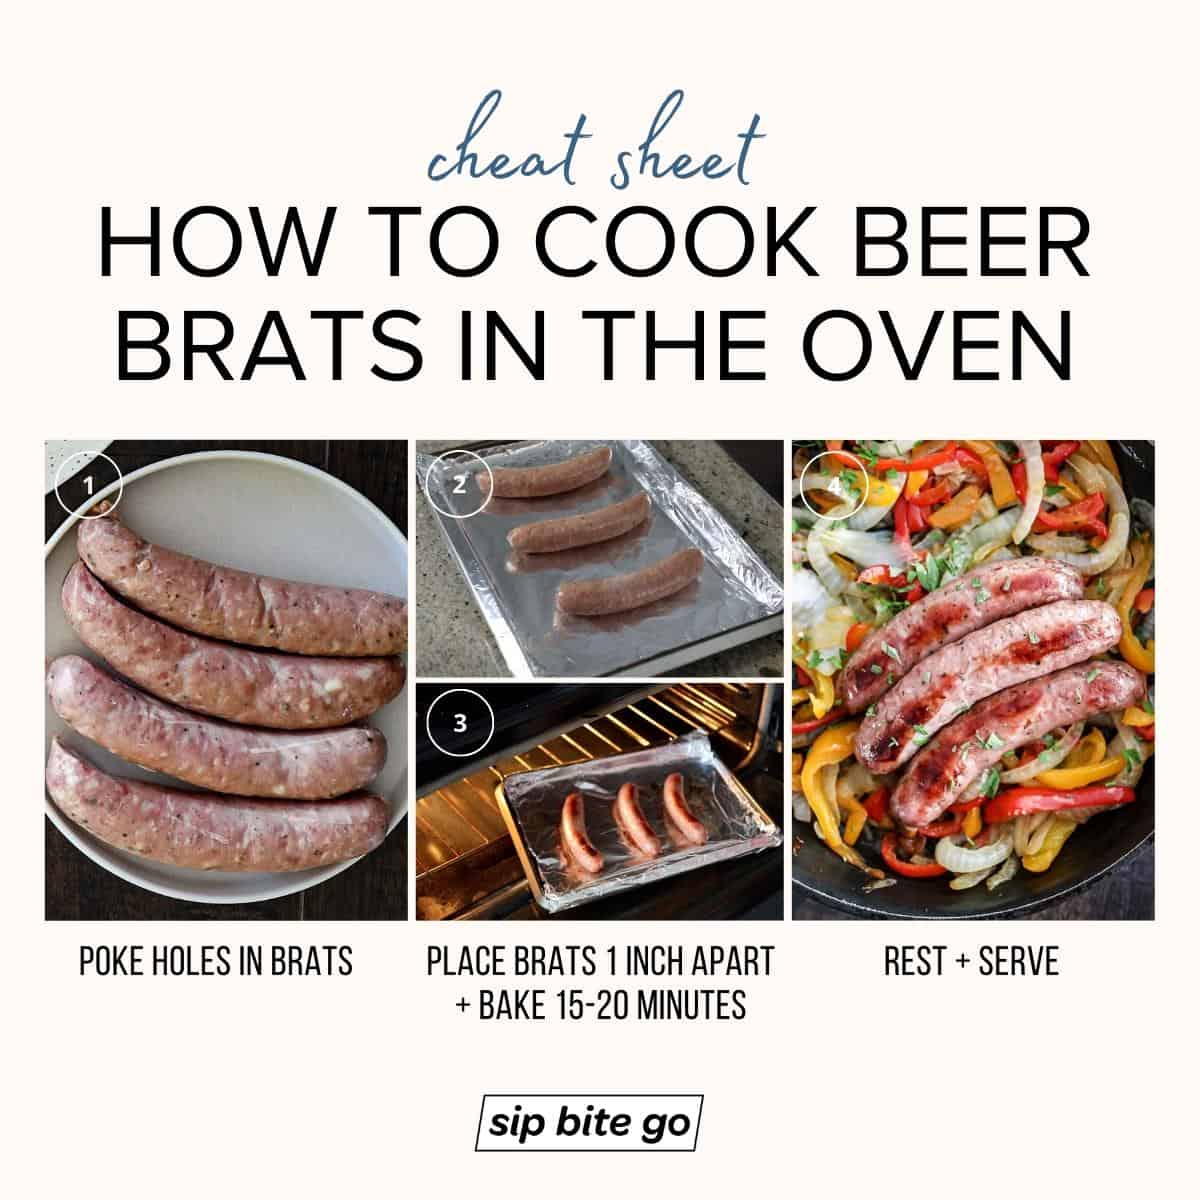 Infographic demonstrating how to cook brats in the oven